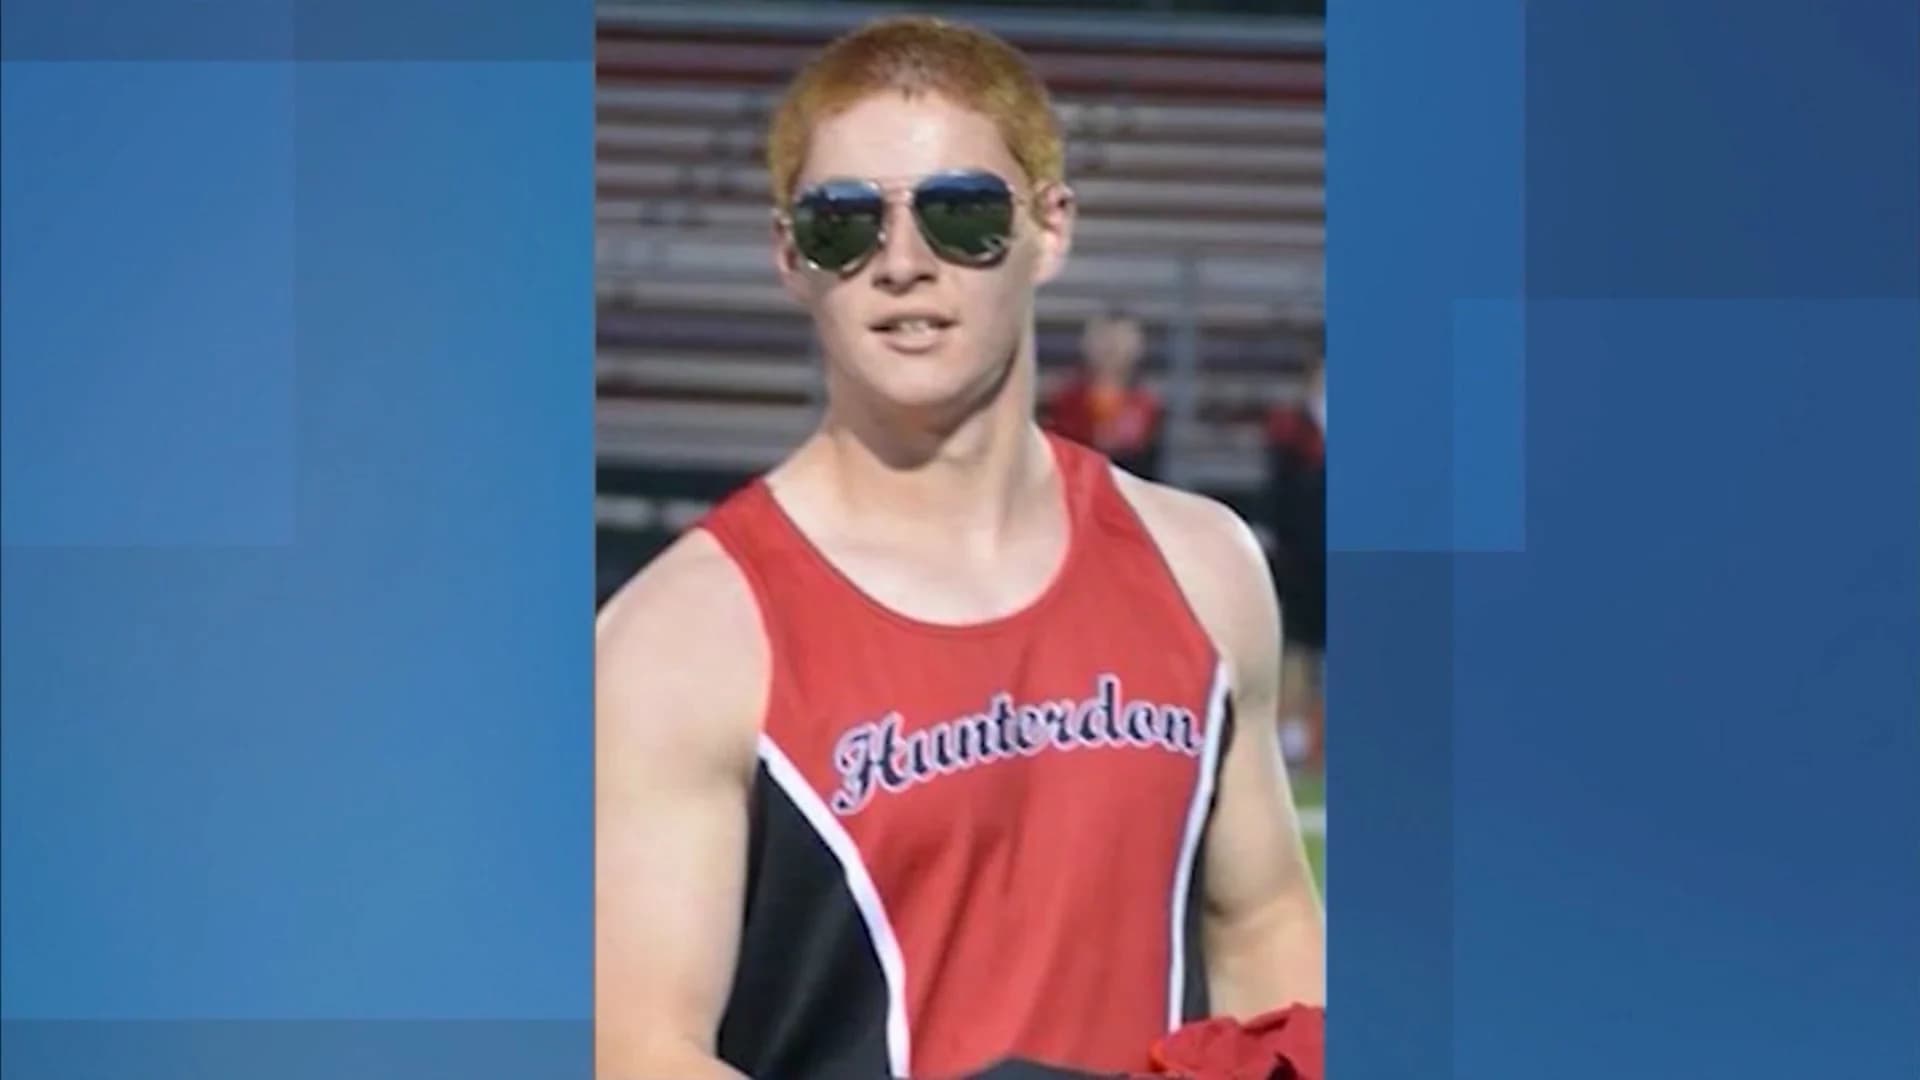 Penn State fraternity hazing death trial scheduled for February